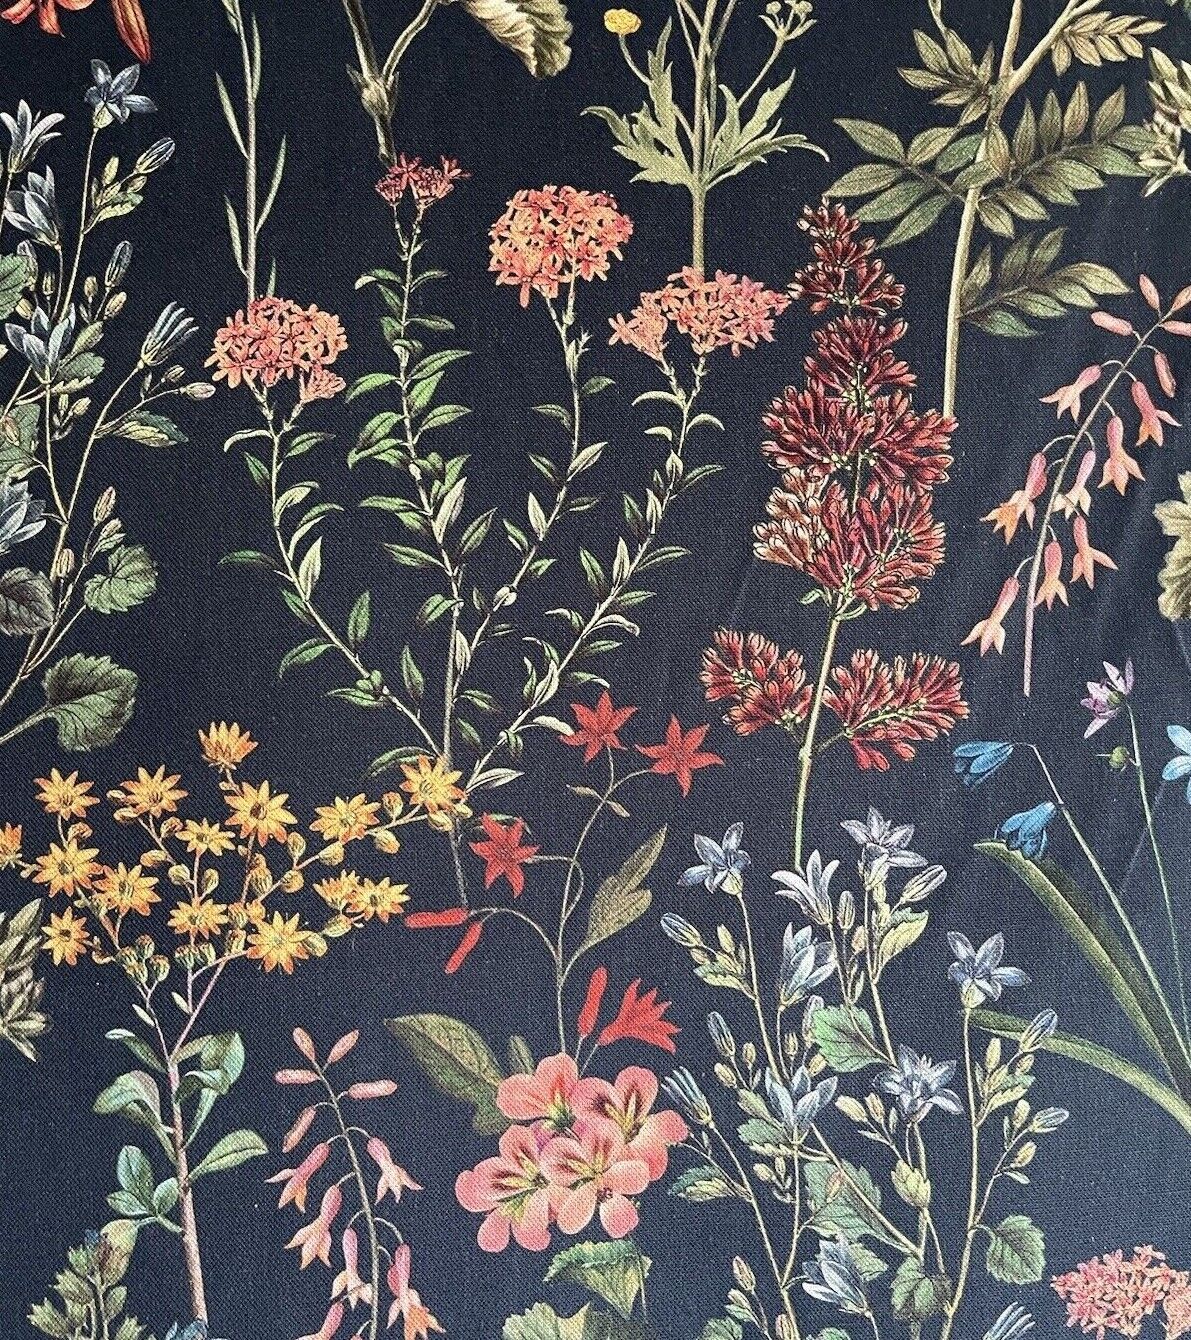 Flower Field Cotton Fabric by Meter Botanical Sewing Material by Yards Floral Print Textile by Metres Hyacinth Azalea Wildflowers Black Textile